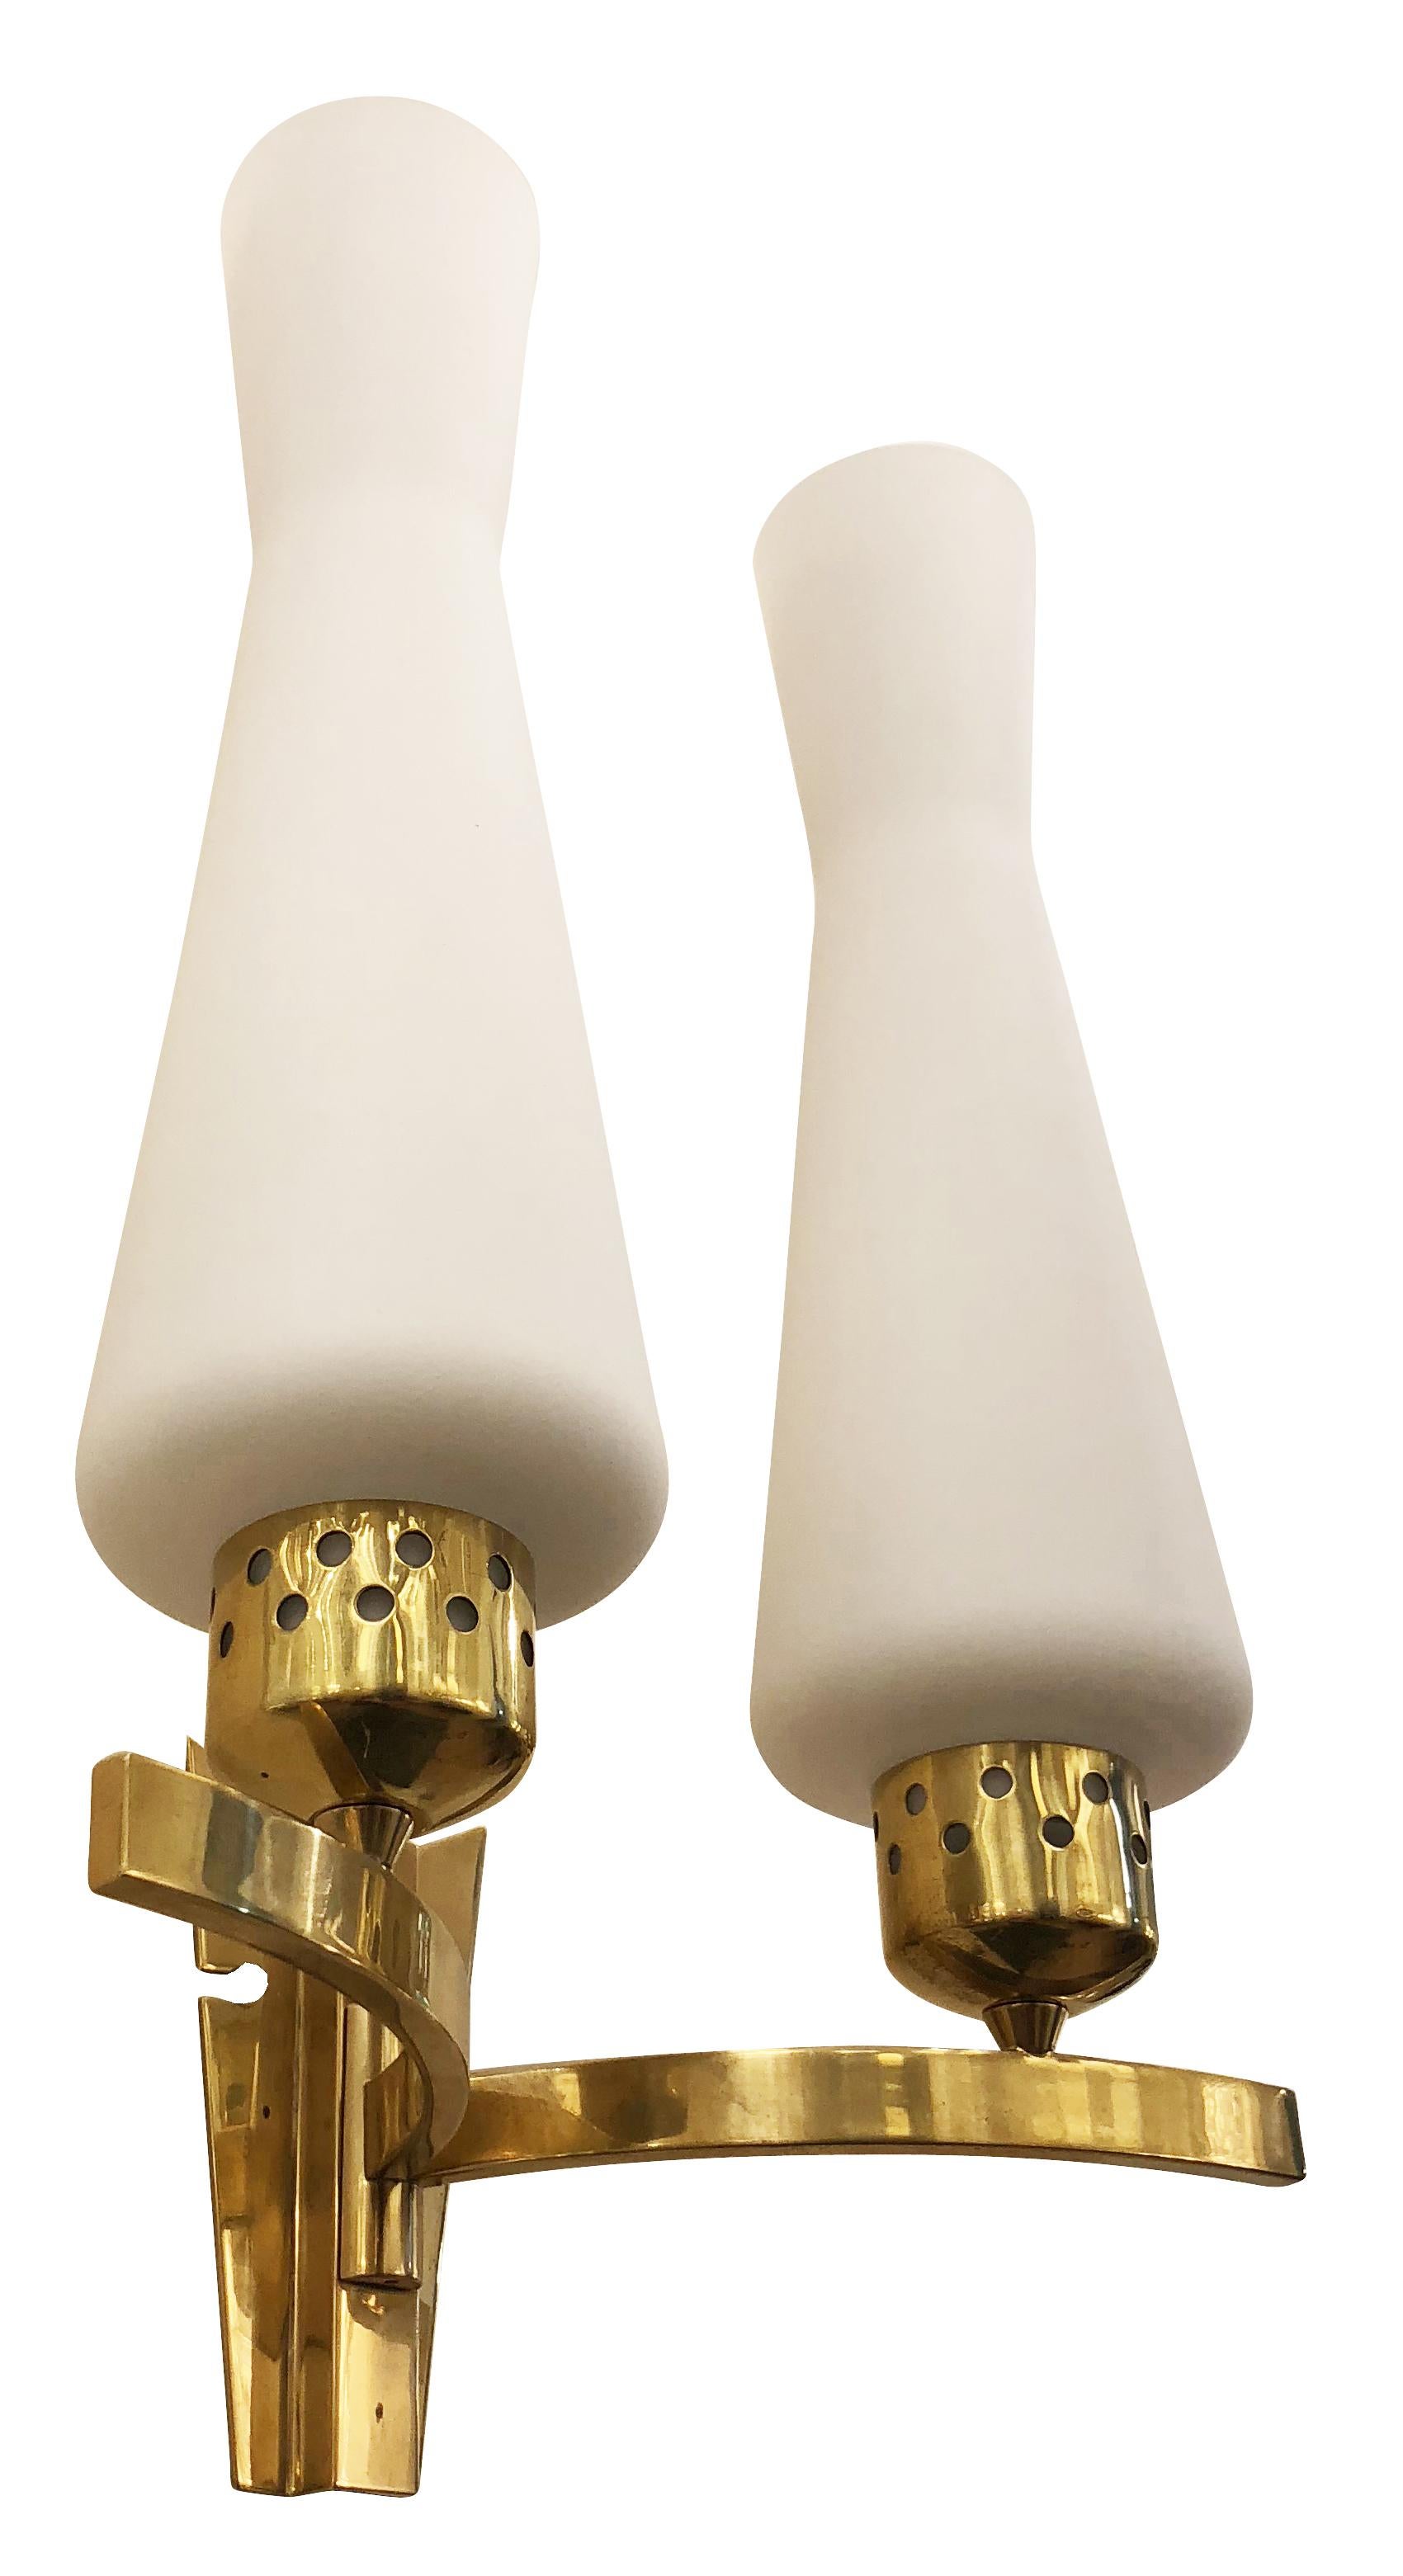 Pair of Italian midcentury wall lights reminiscent of the work of Arredoluce with brass frames and tall frosted glass shades. Exquisite detailing in the shade holders and back plates. Two candelabra sockets per sconce.

Condition: Excellent